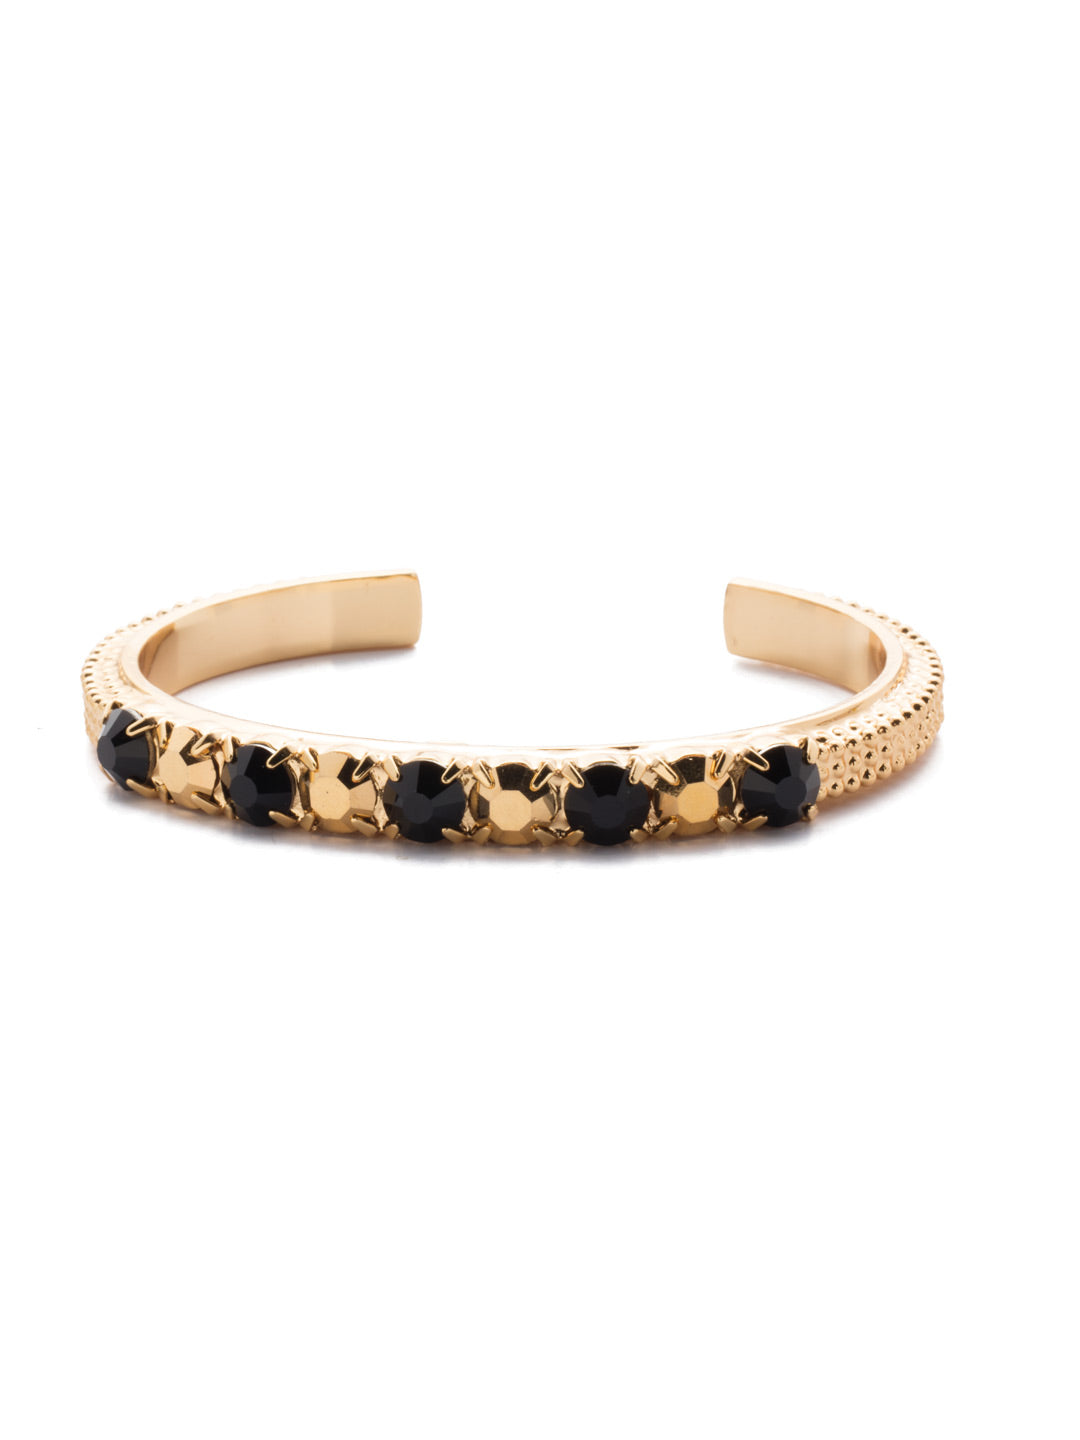 Macy Cuff Bracelet - 4BEN11BGGTR - <p>This crystal cuff is perfect for any day you want to add a little sparkle to make you shine. From Sorrelli's Golden Tradition collection in our Bright Gold-tone finish.</p>